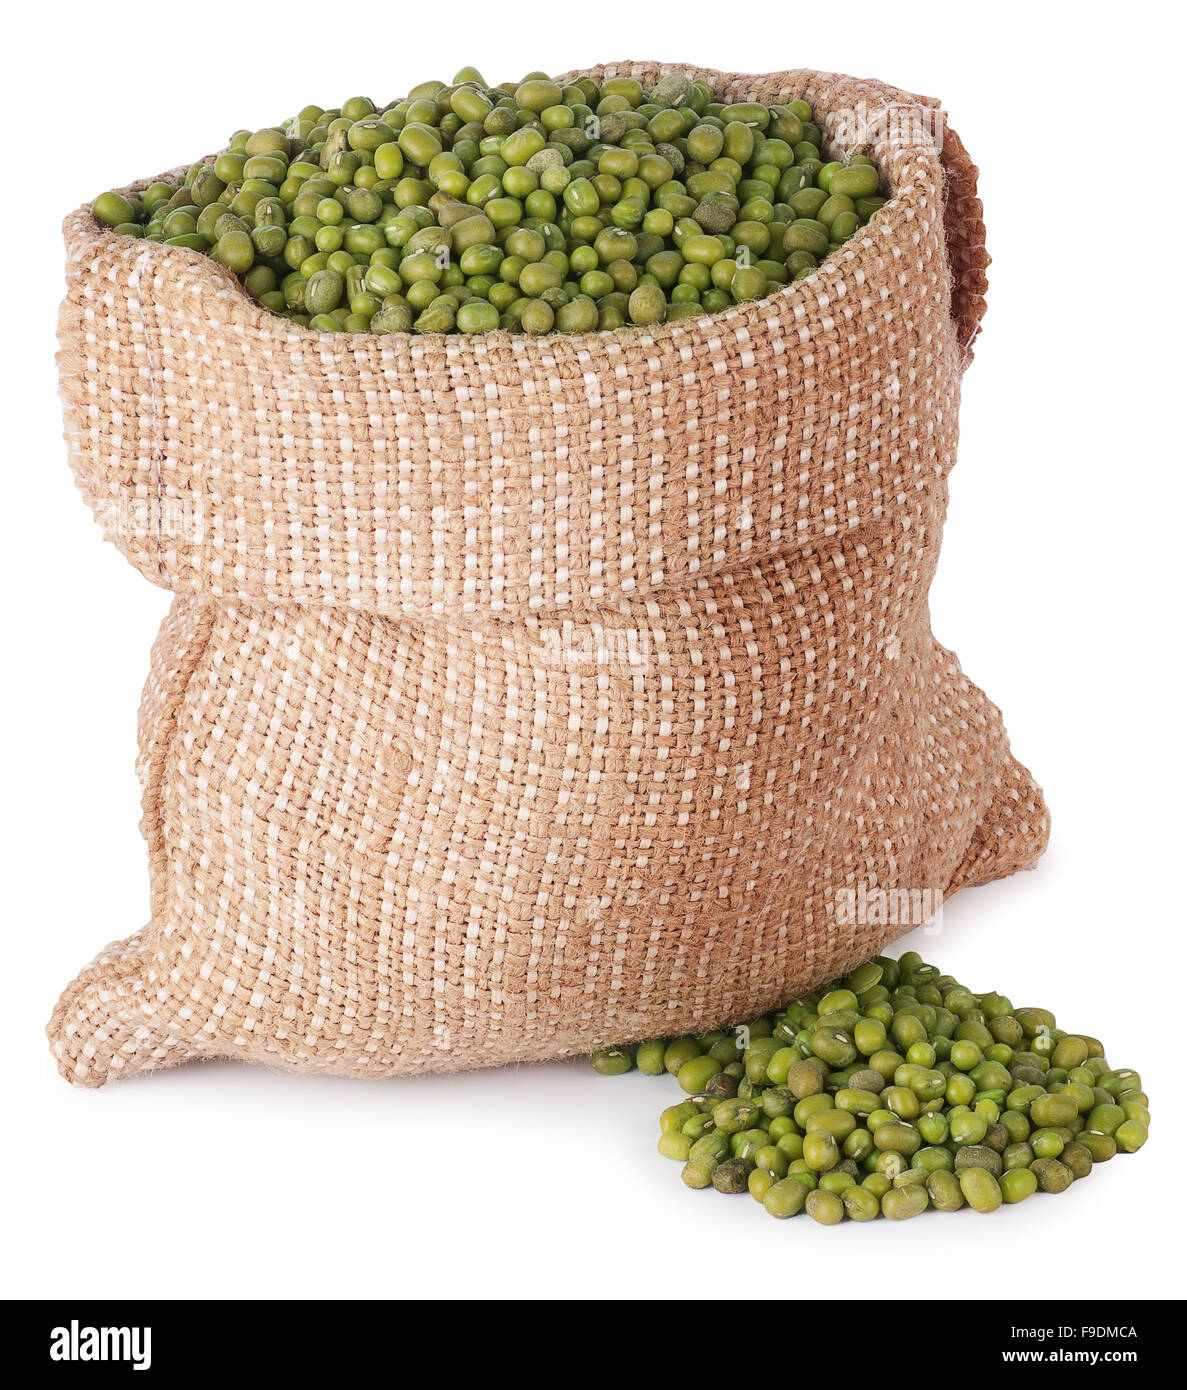 Mung beans in a burlap bag  isolated on white background Stock Photo